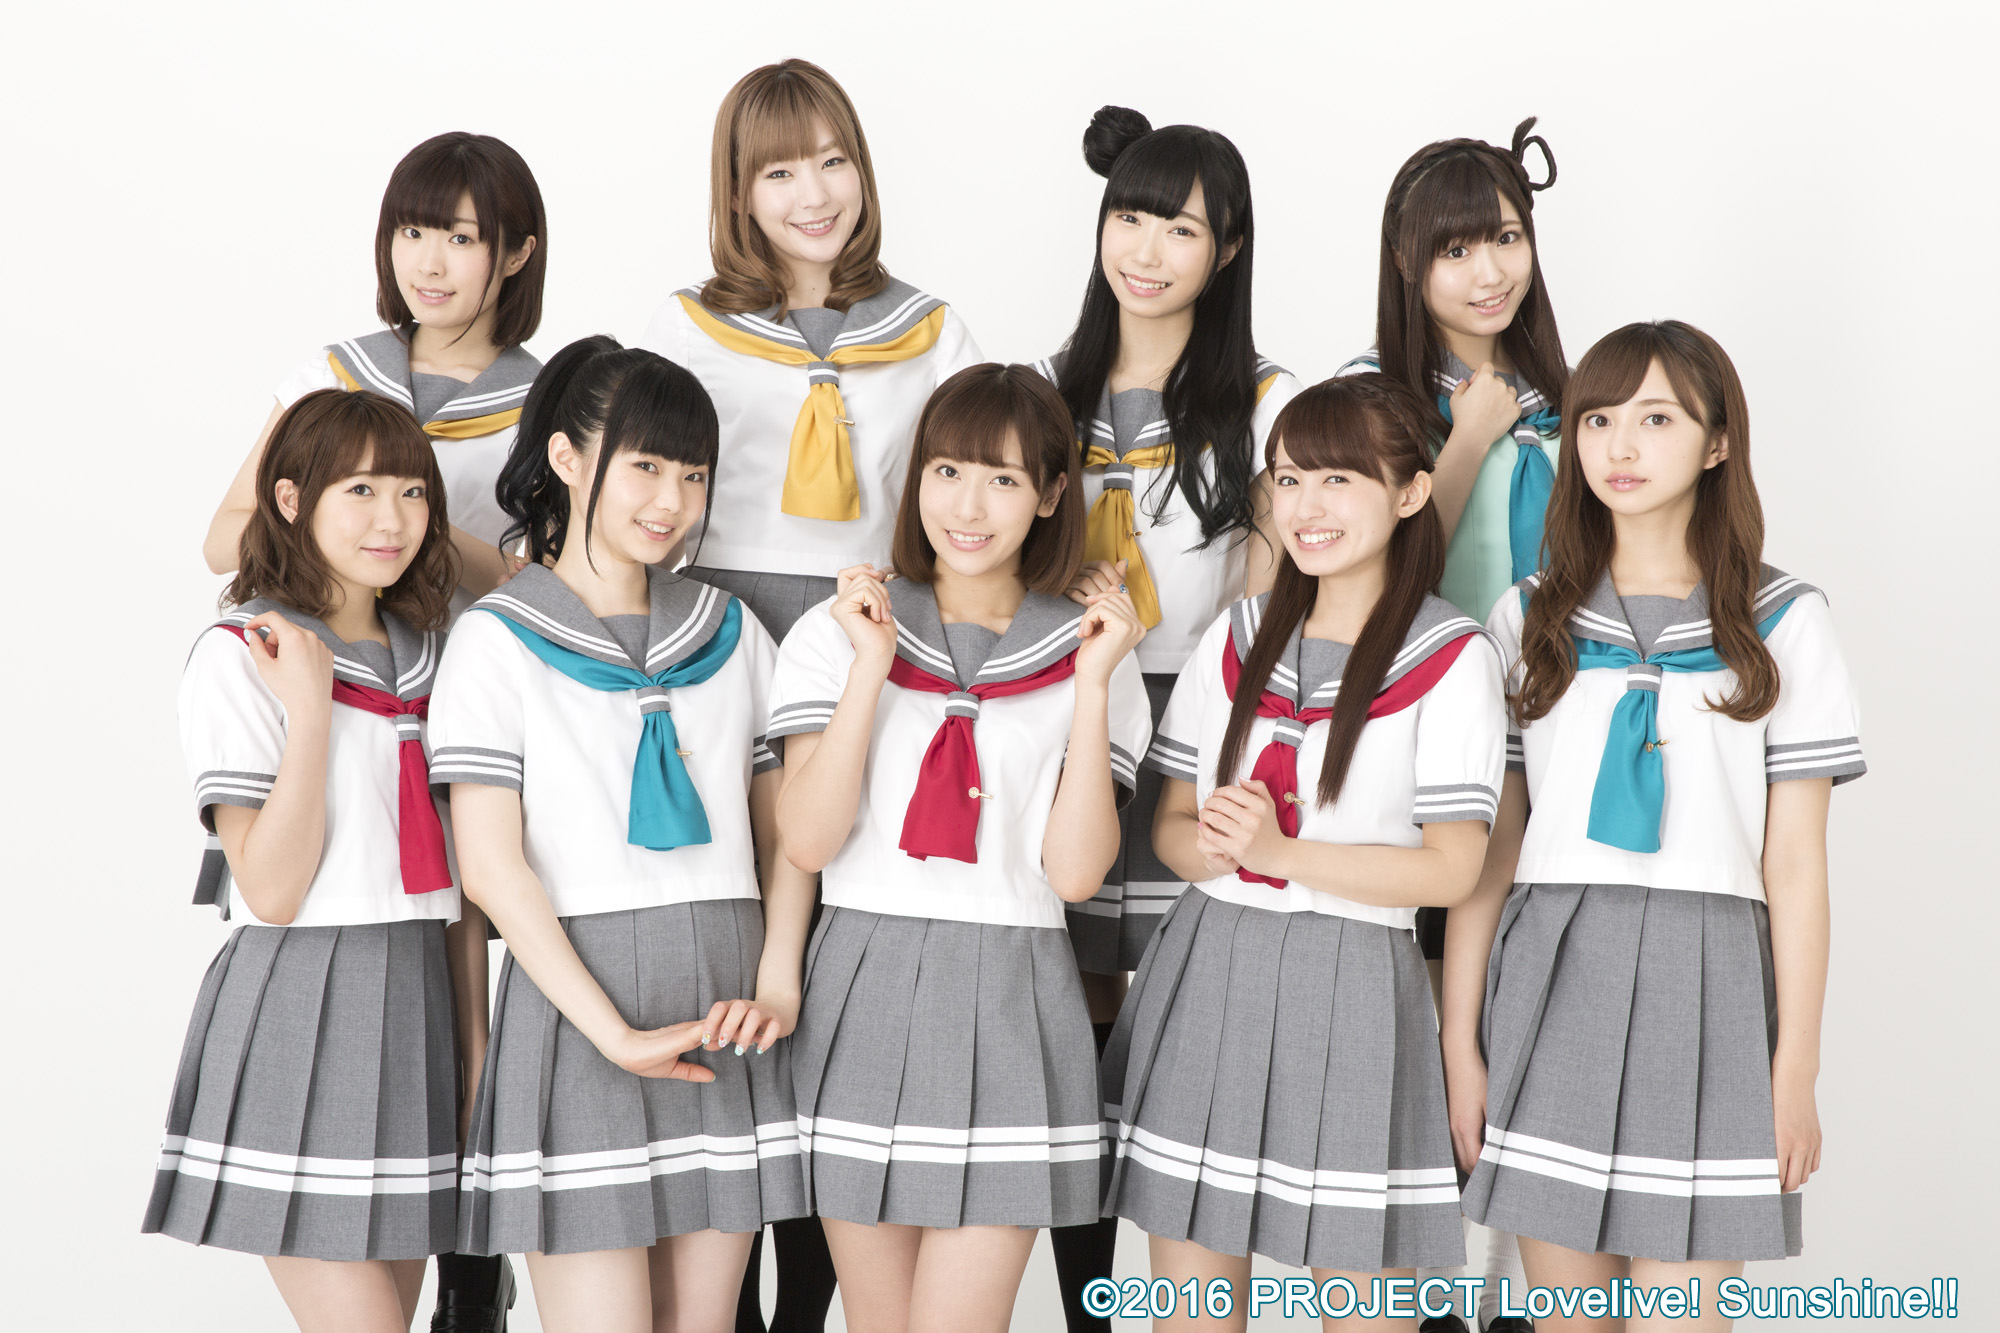 Press Release: Aqours and THE IDOLM@STER CINDERELLA GIRLS are final